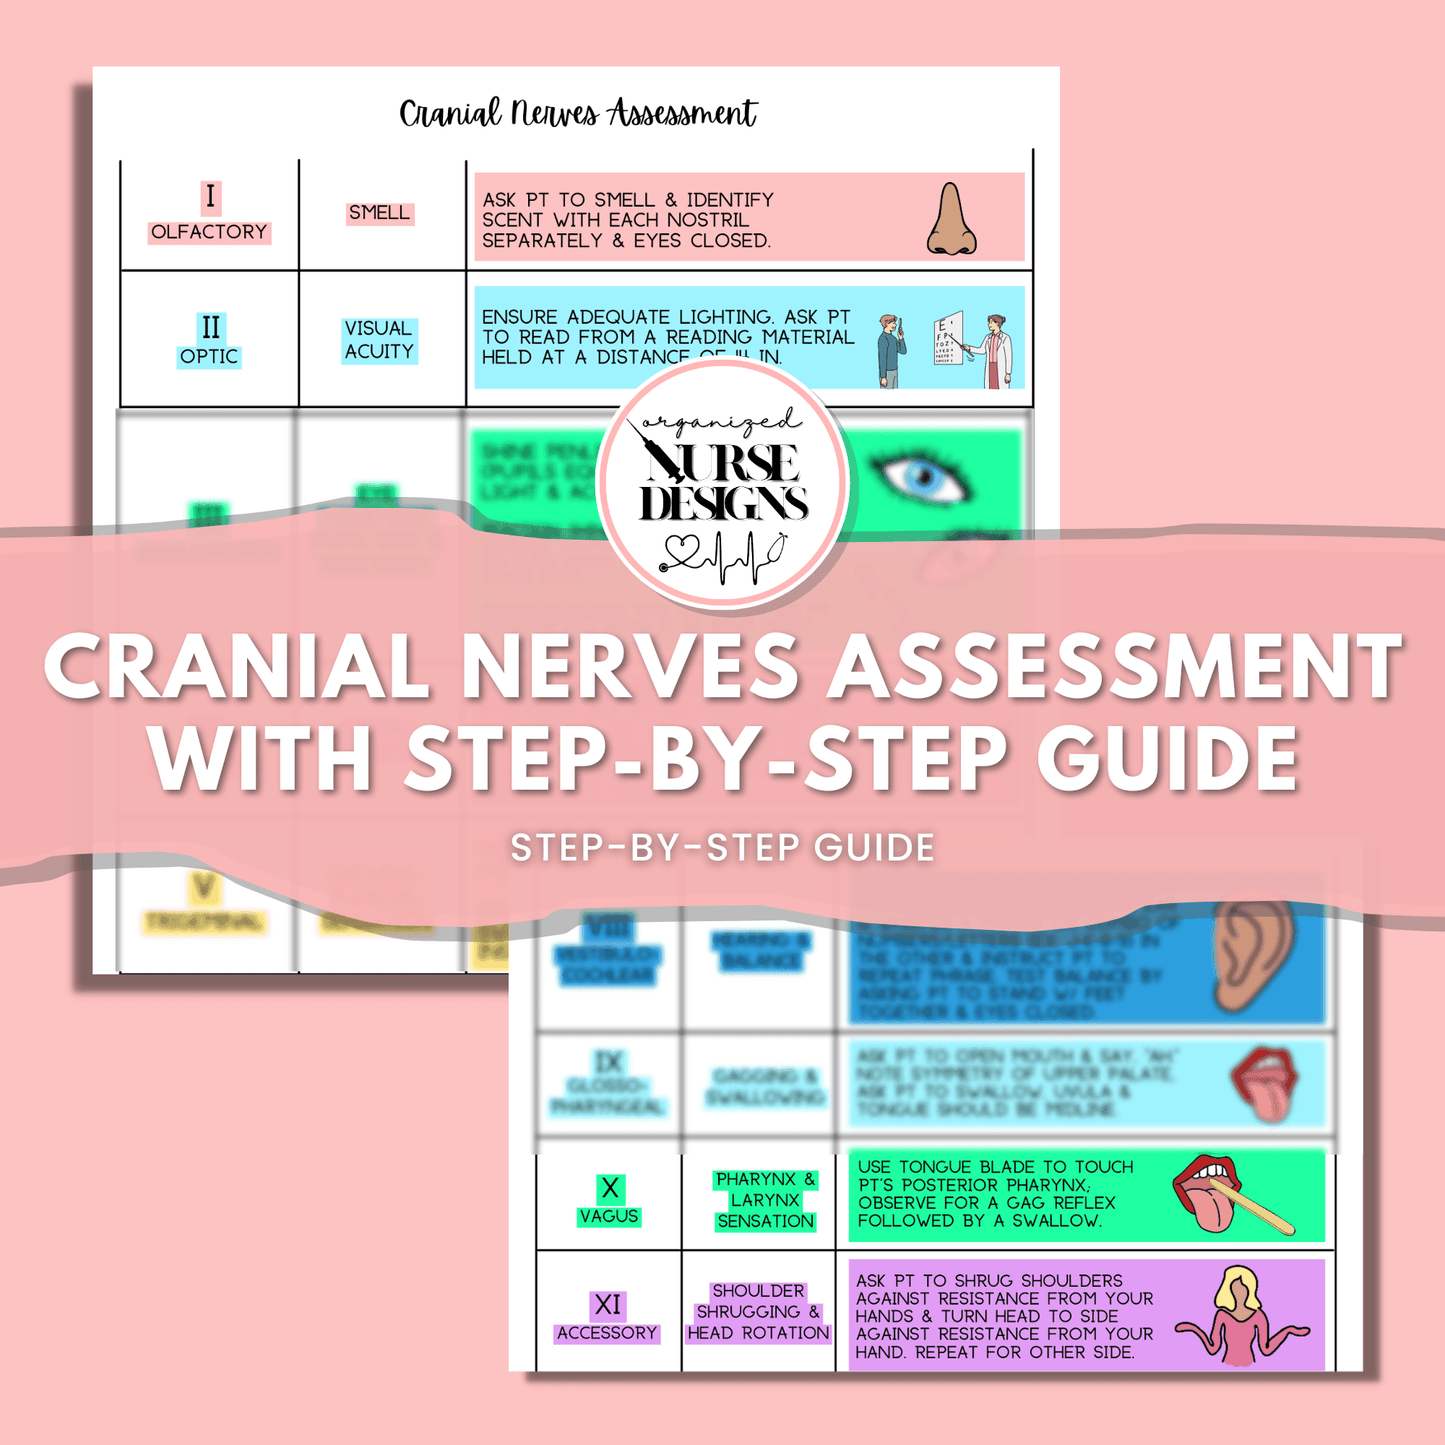 Cranial Nerves Assessment Step-by-Step Guide for Nursing Students by OrganizedNurseDesigns